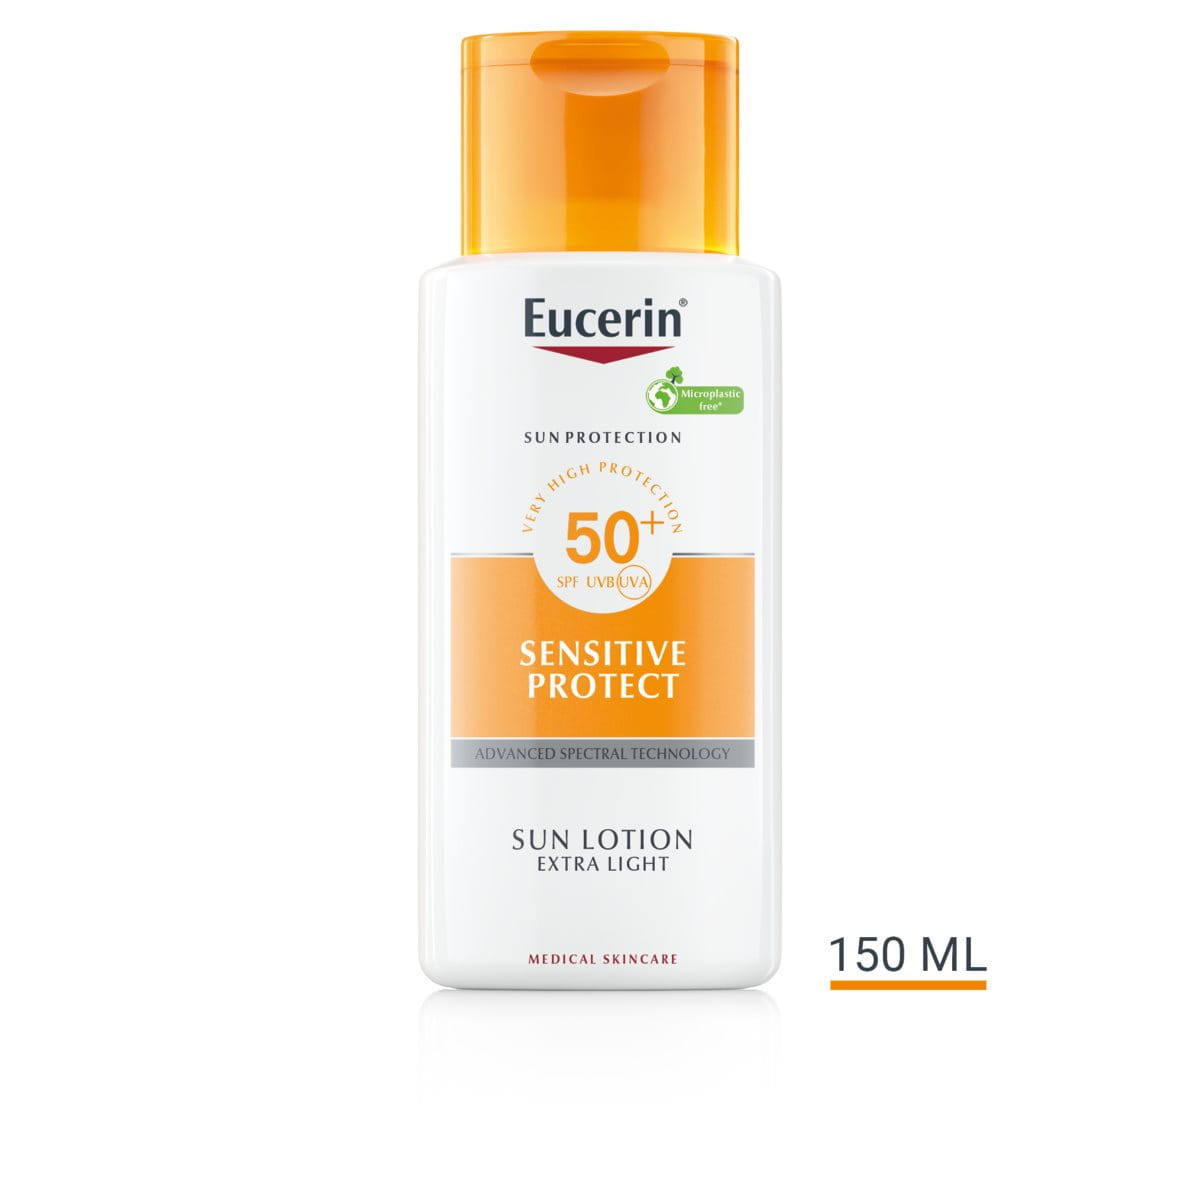 Sun Lotion Extra Light Sensitive Protect SPF 50+, sunscreen for the body